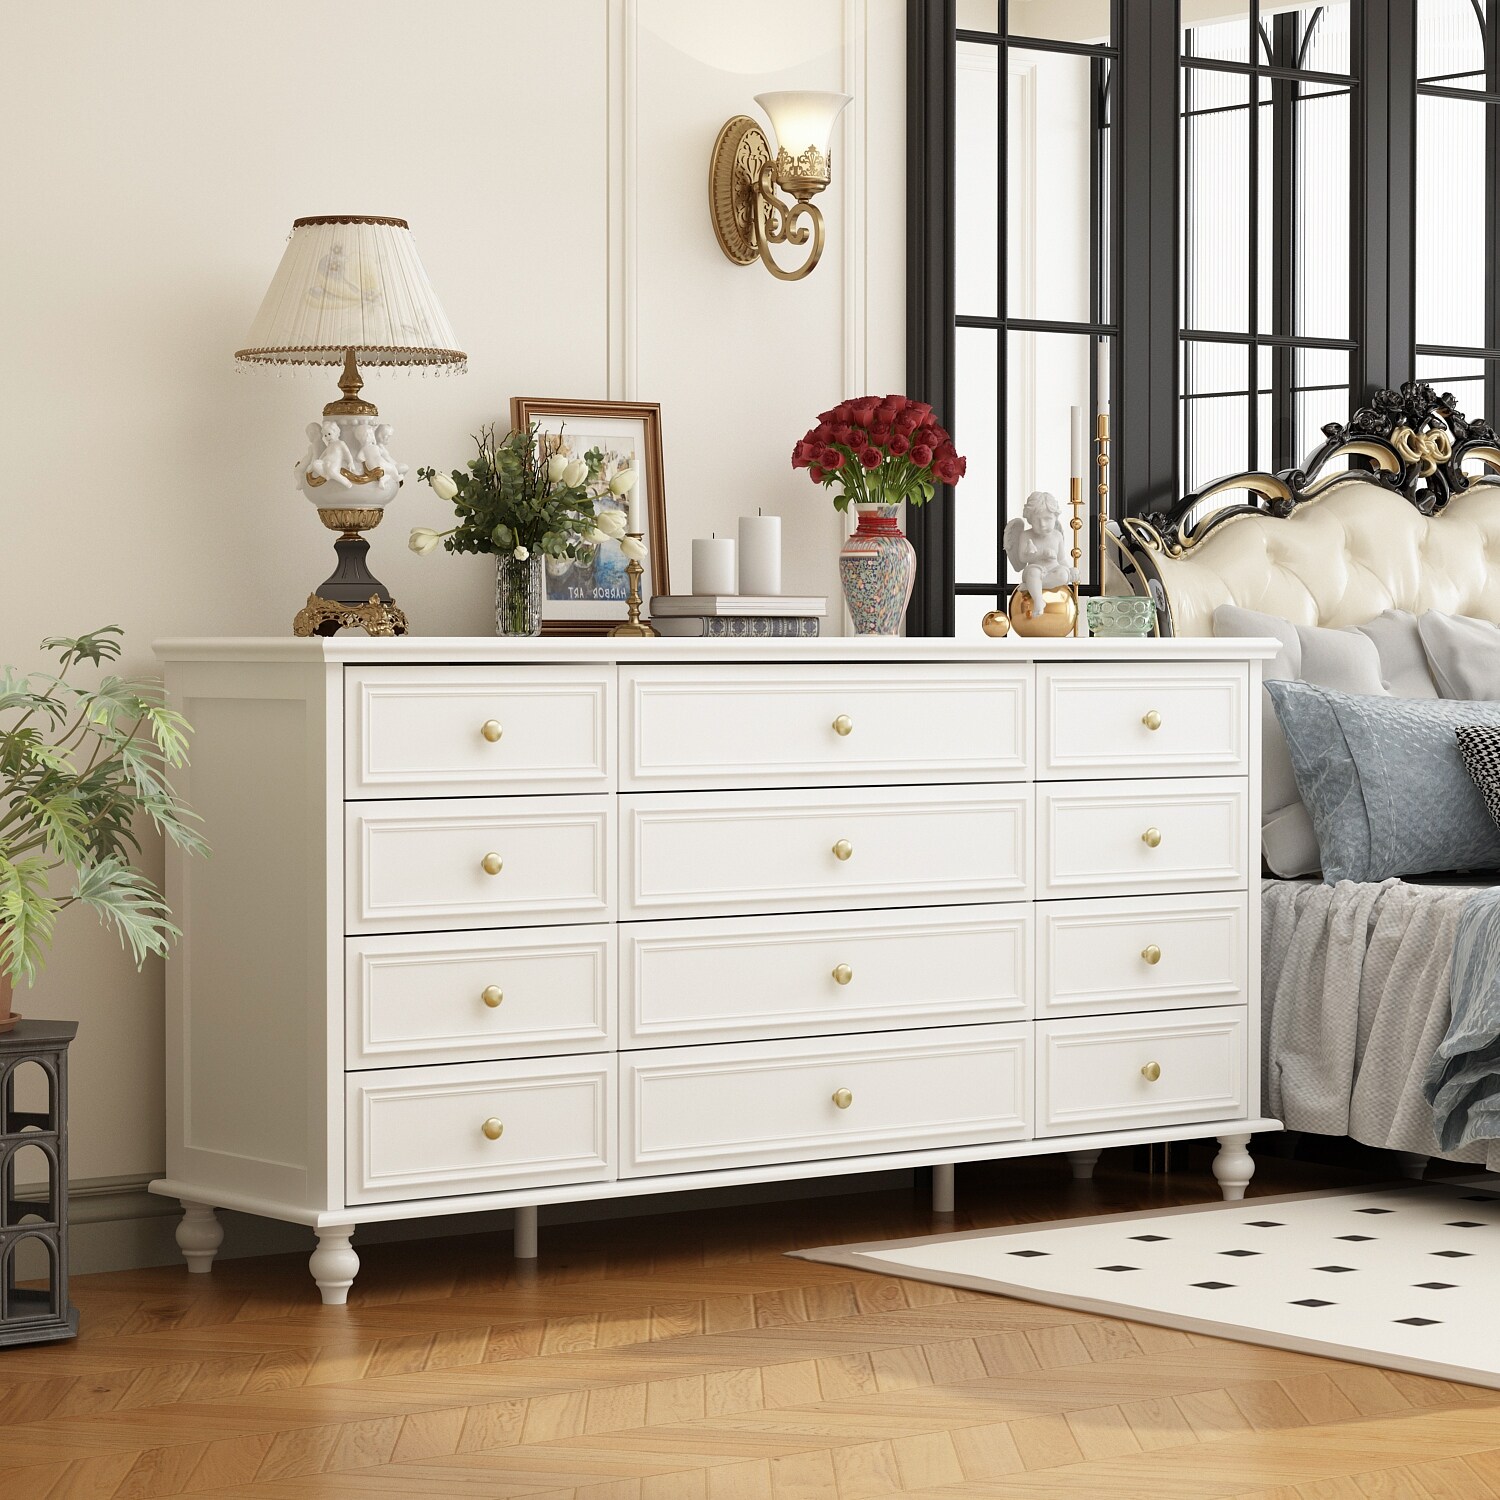 https://ak1.ostkcdn.com/images/products/is/images/direct/c819d7d14182b29fb00a3af0ff40c506ea76e34a/63%22W-Wood-Dresser-Bedroom-Storage-Drawer-Organizer-Closet-12-Drawer.jpg